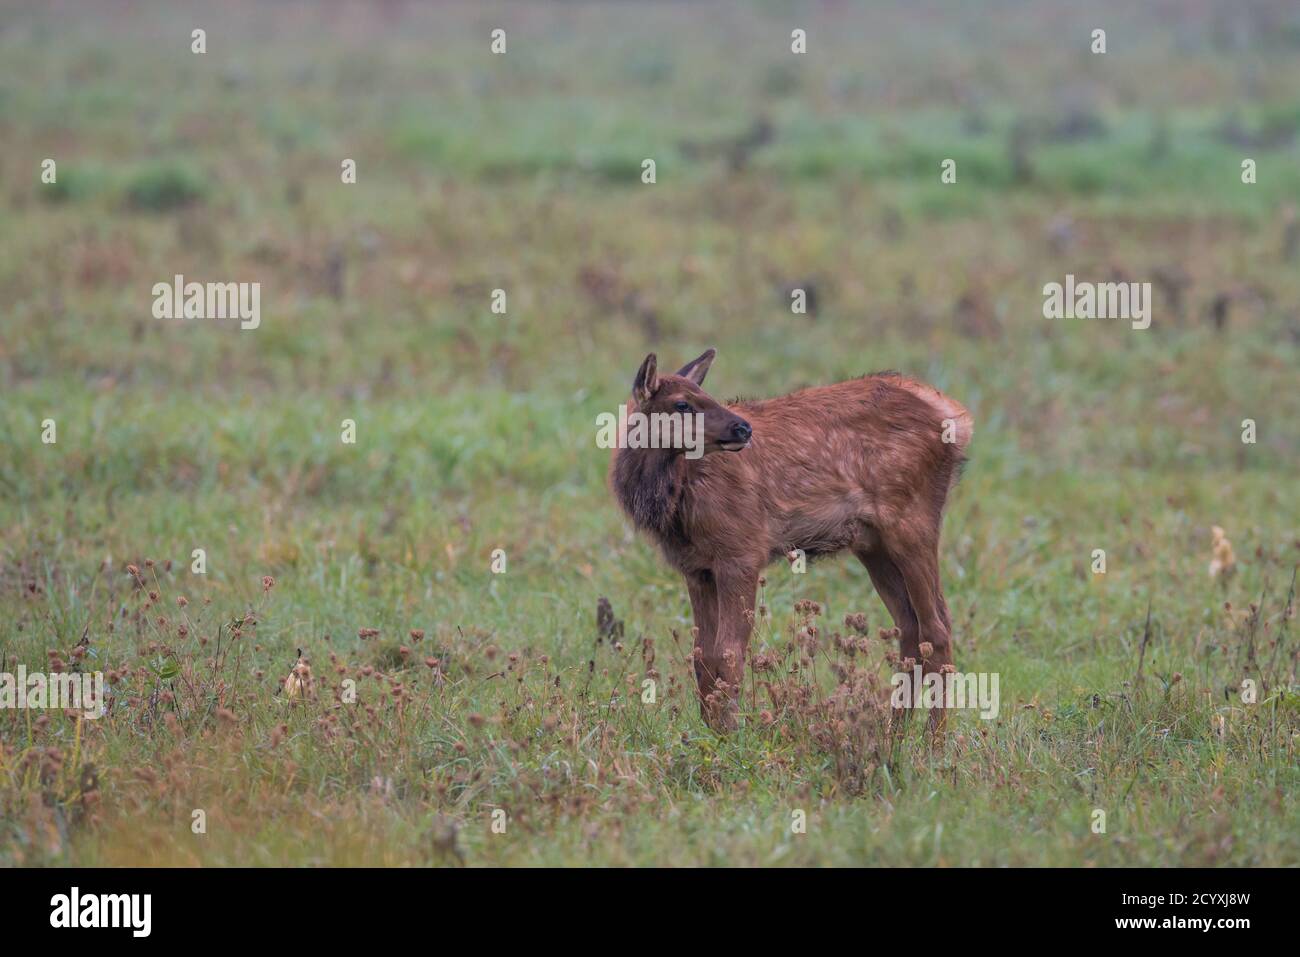 An elk calf with spots barely visible stands in a field in Benzette, PA, USA Stock Photo